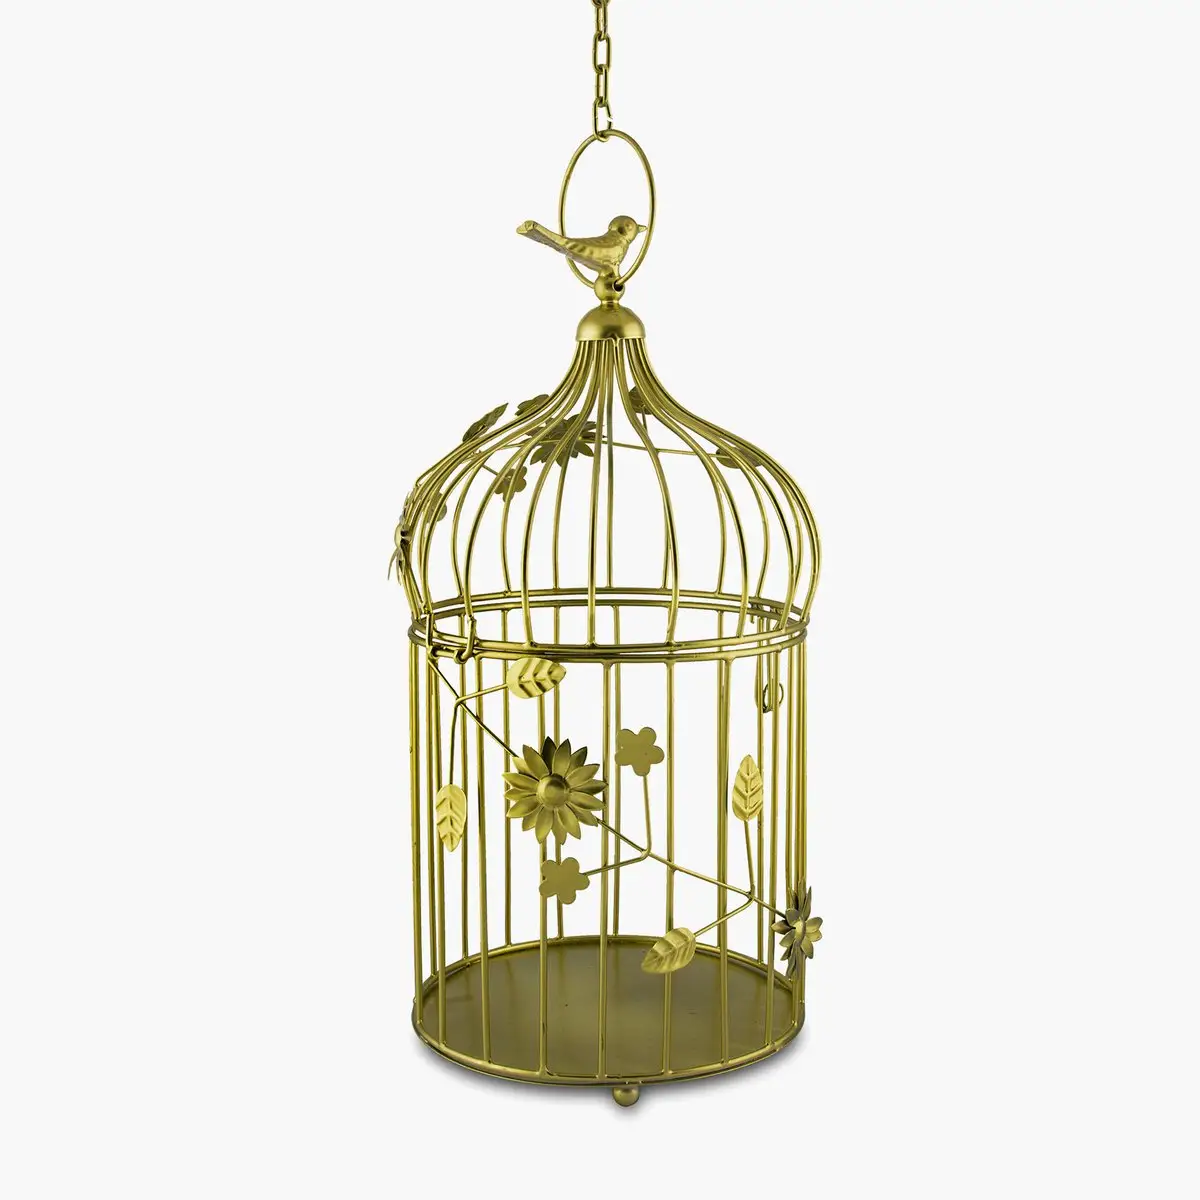 Wholesale metal decorative cage for indoor outdoor home garden wedding decorative hanging bird cage wire lantern candle holders